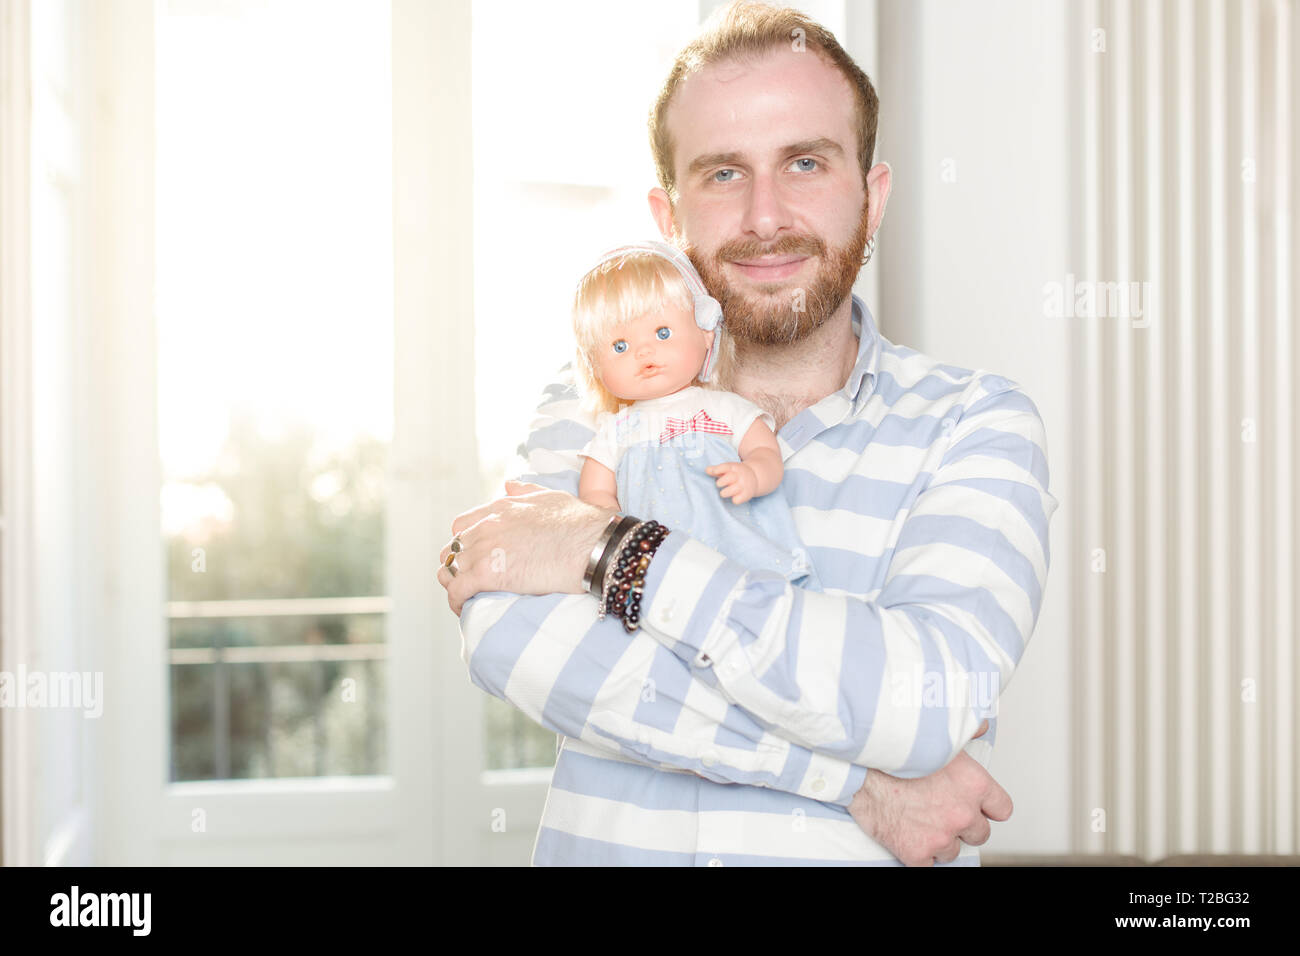 Smiling Redhead Man with Beard  Hugging a Doll Stock Photo